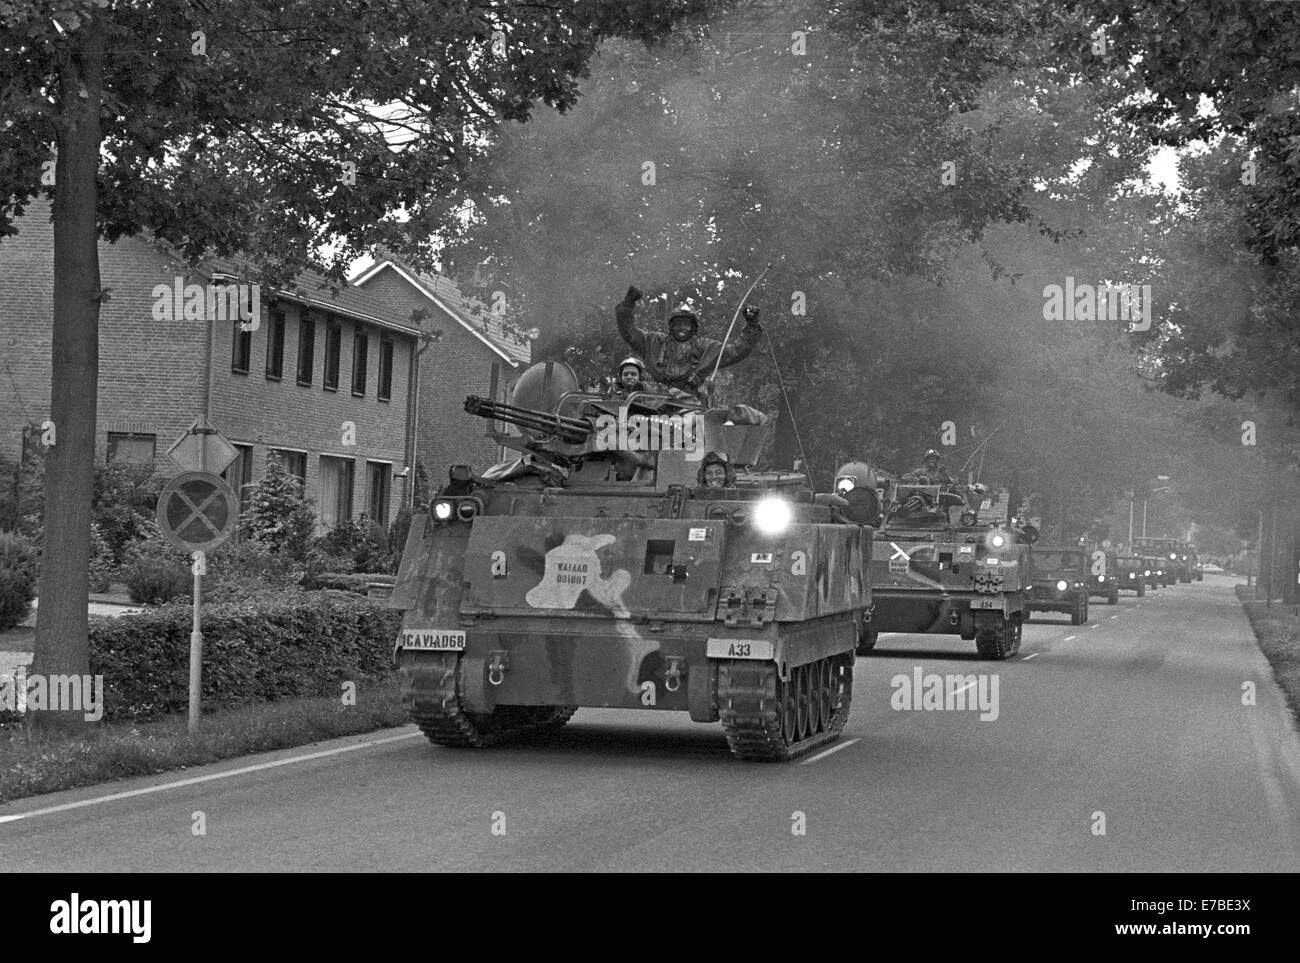 NATO exercises in the Netherlands, column of U.S. Army armored vehicles cross a village (October 1983) Stock Photo